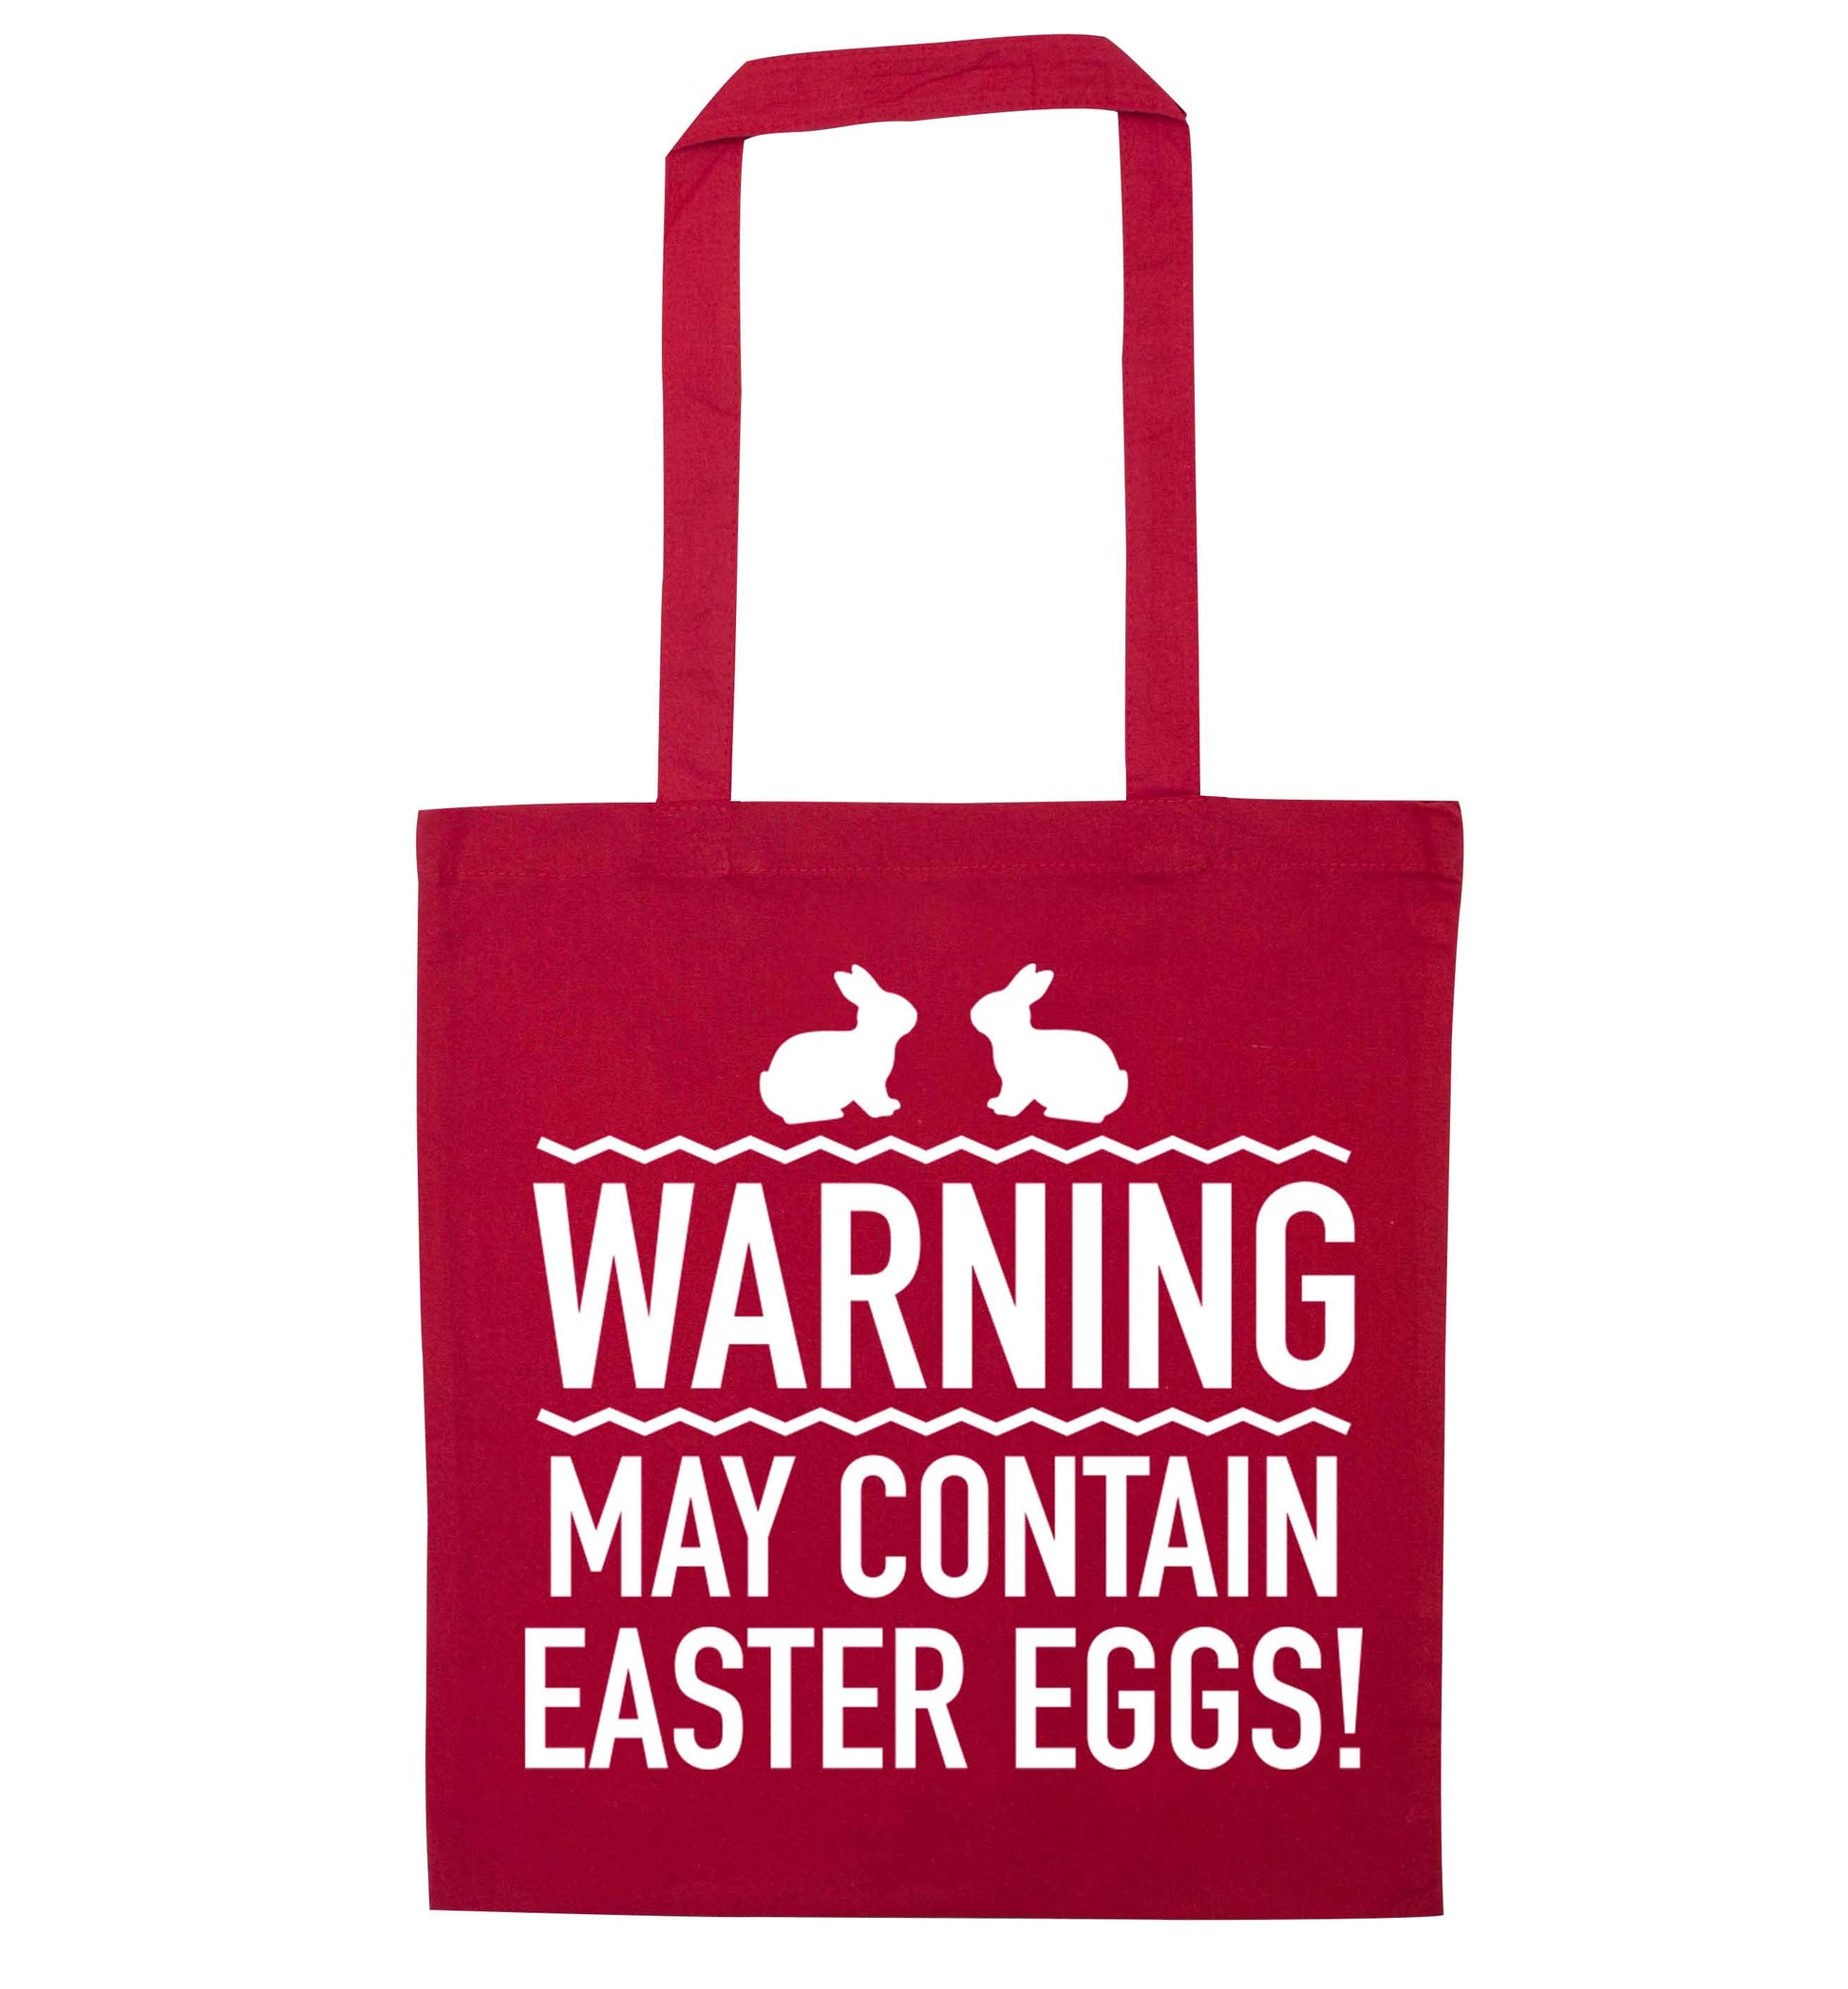 Warning may contain Easter eggs red tote bag